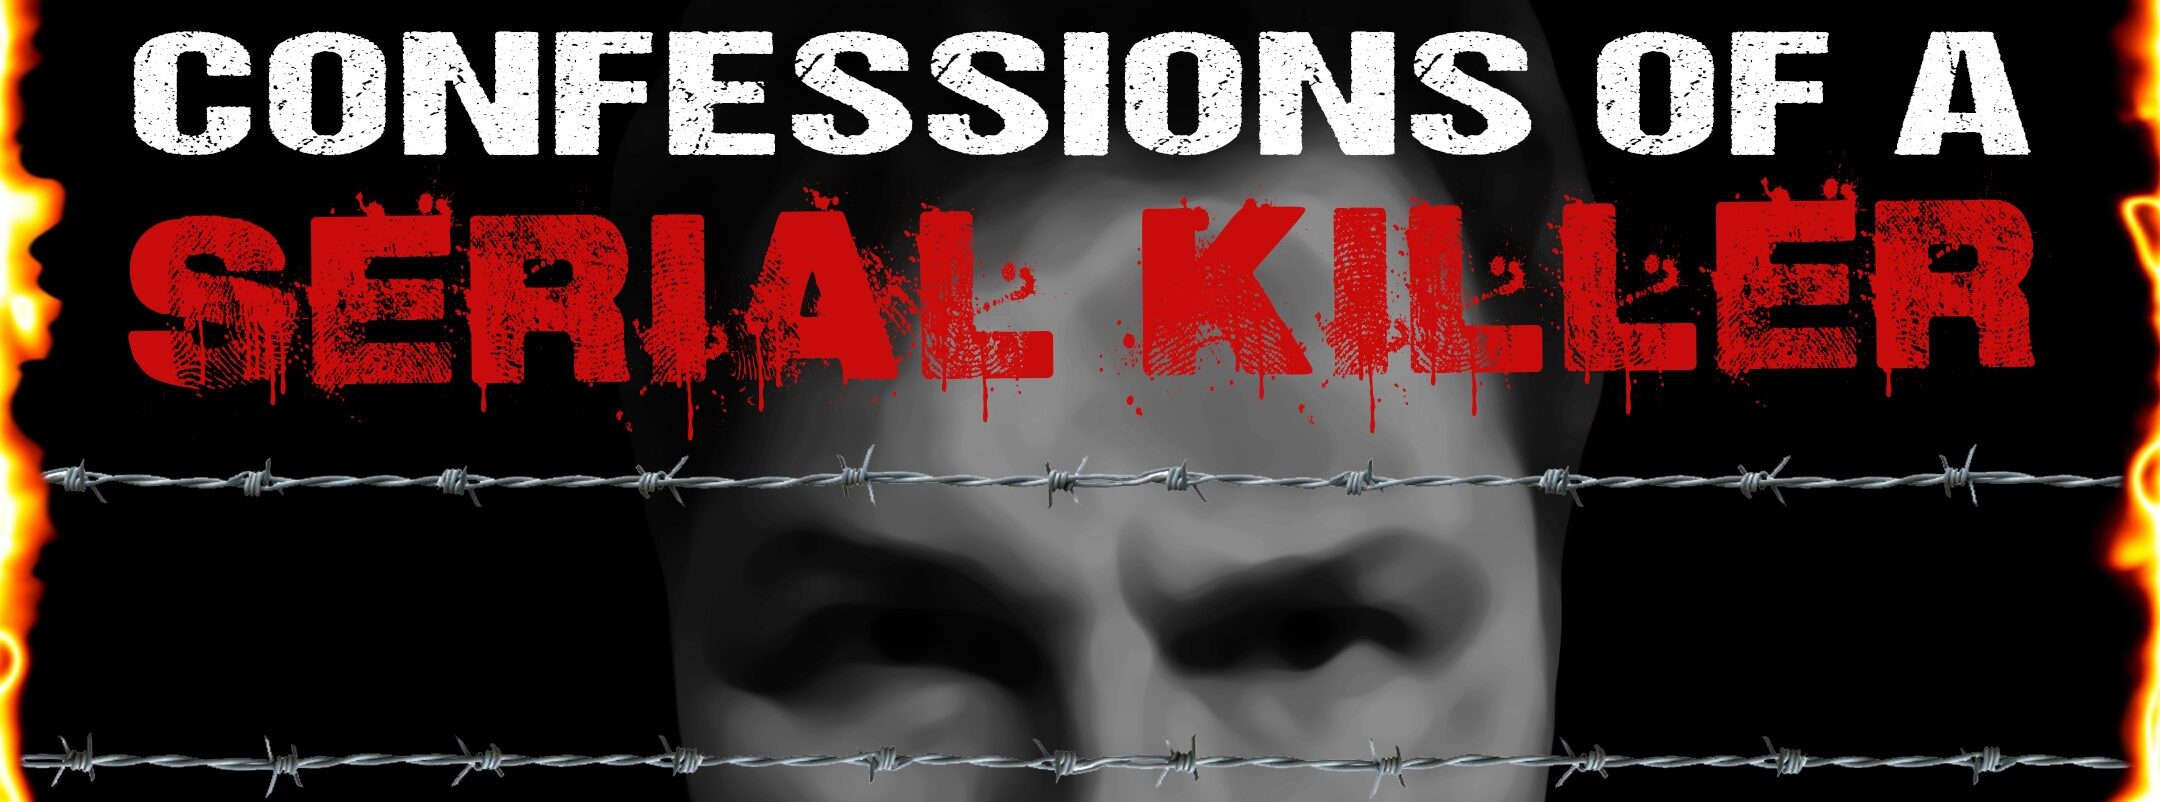 Meet The Actor – Confessions of a Serial Killer